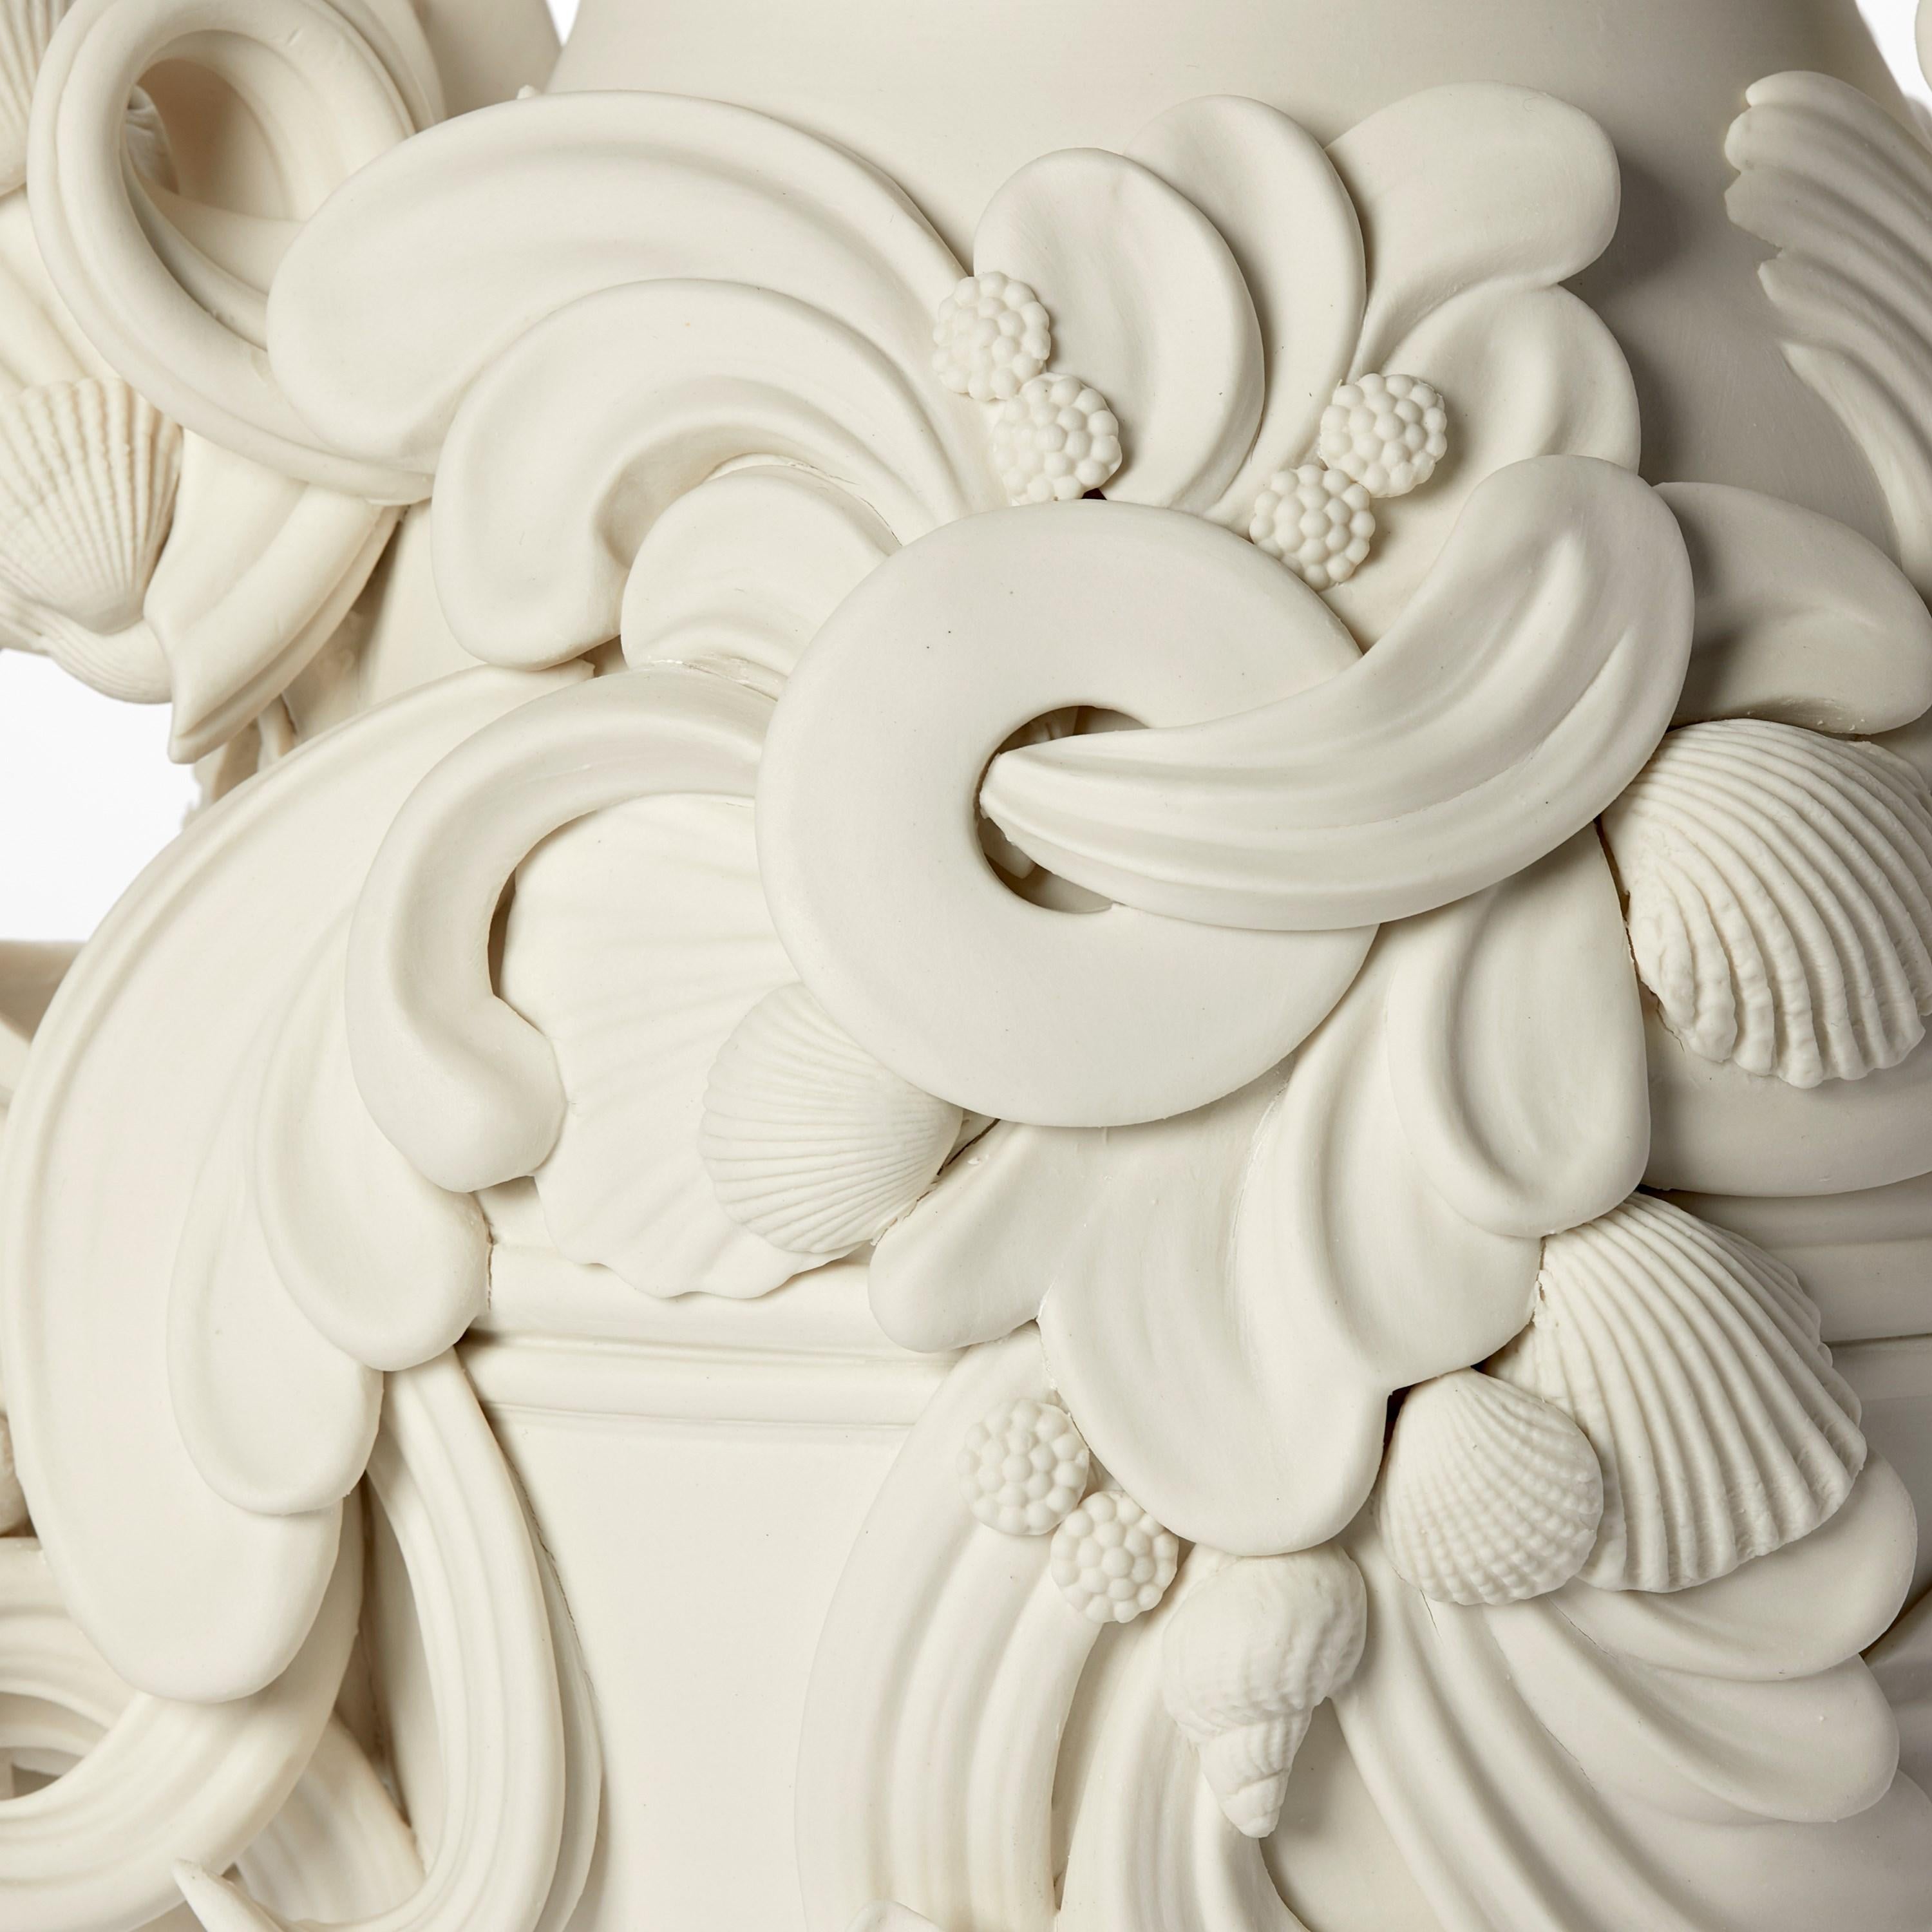 Contemporary Rocaille IV, rococo inspired porcelain vessel with swirls & shells by Jo Taylor